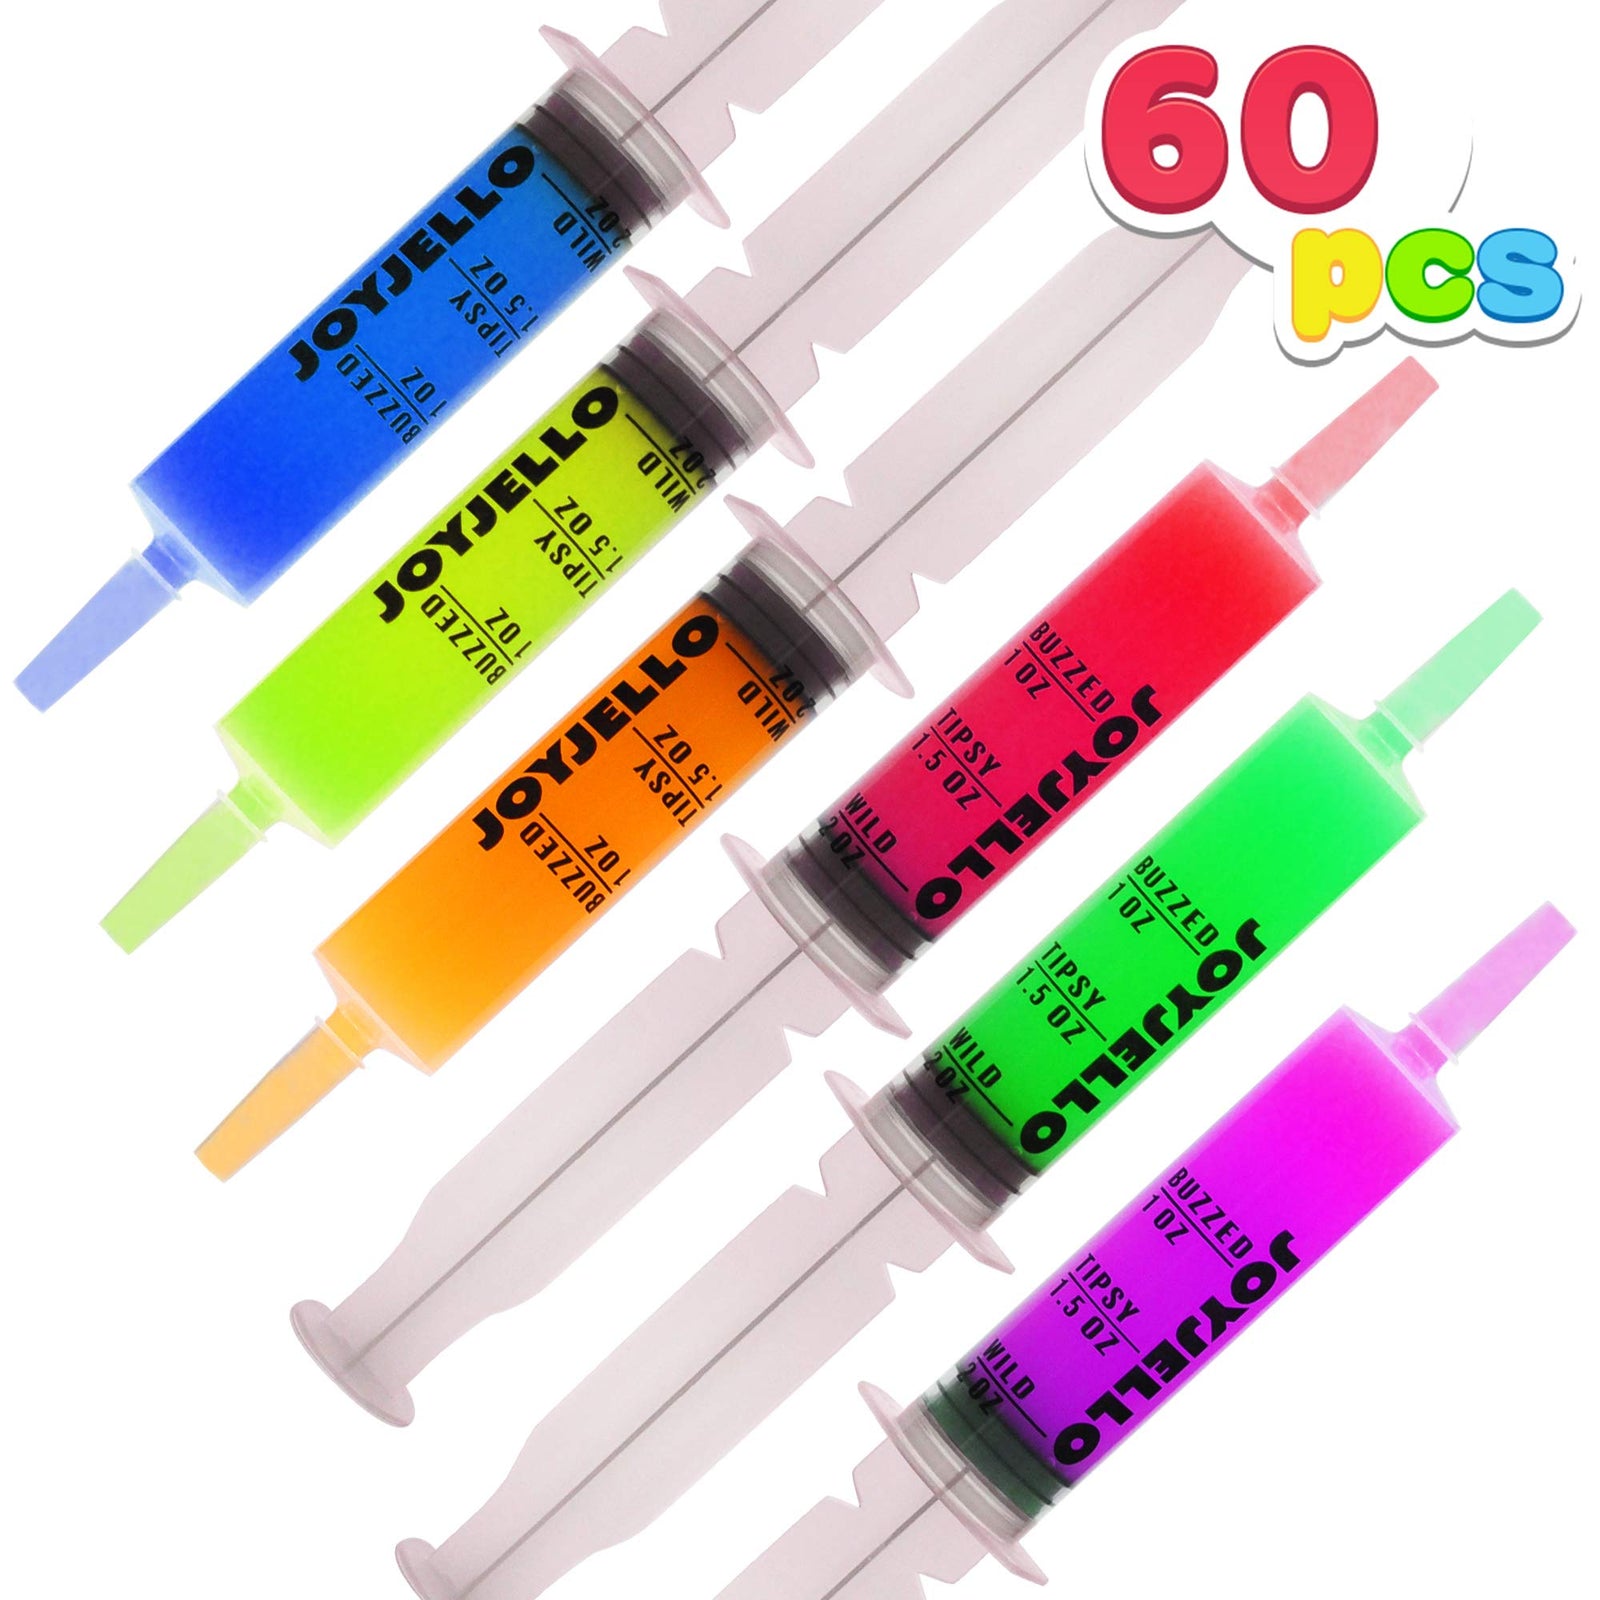 60 Pcs Jello Shots Syringes, 2 oz Reusable Plastic Alcohol Tubes, Container with Caps for Summer and Themed Party, Halloween Party Favors, Graduation Party Decorations